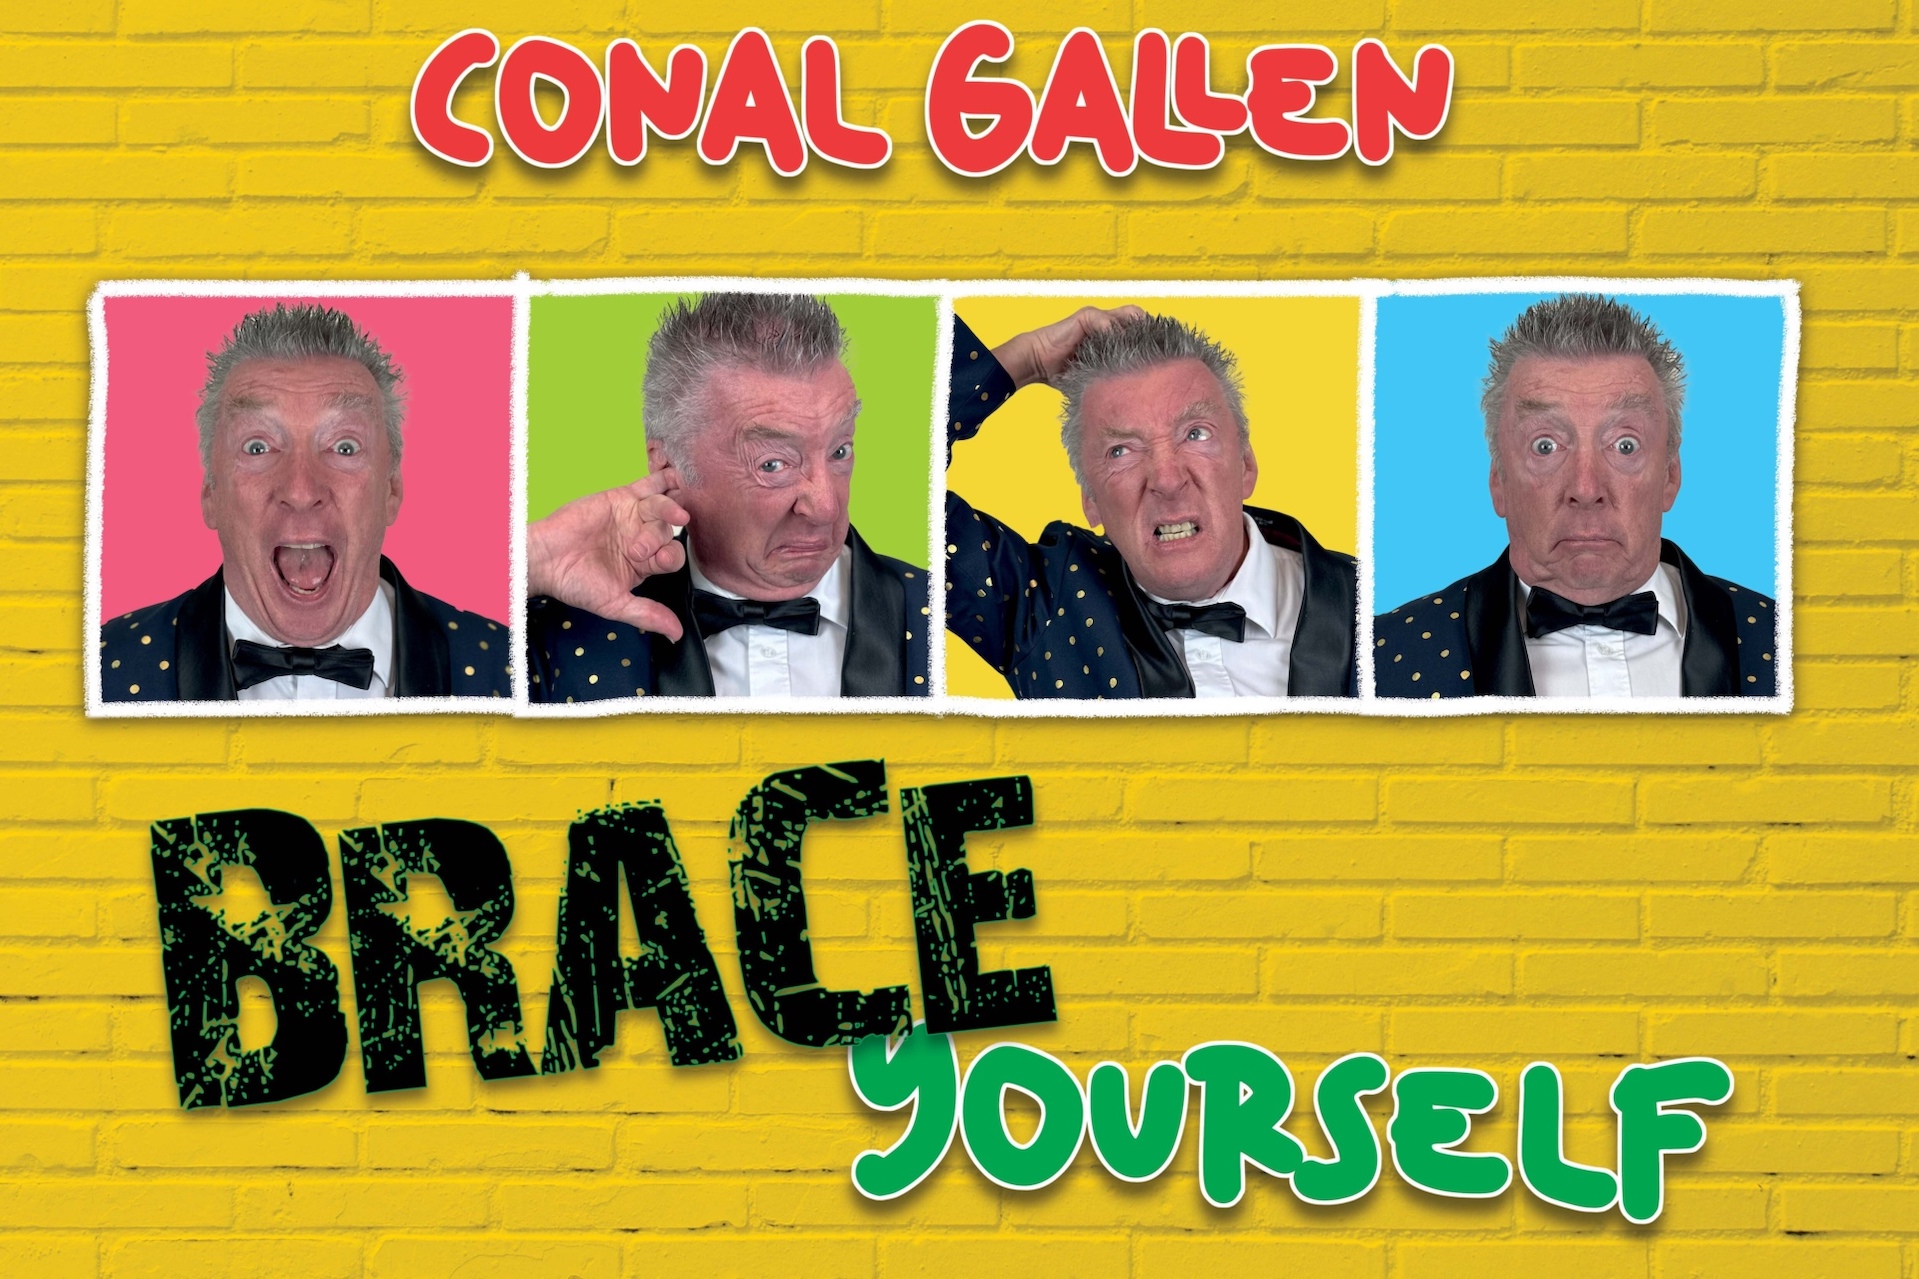 a man wearing black bow tie and white shirt in 4 different shots making different faces in a line across the centre against background of yellow brick with large event text in different colours.